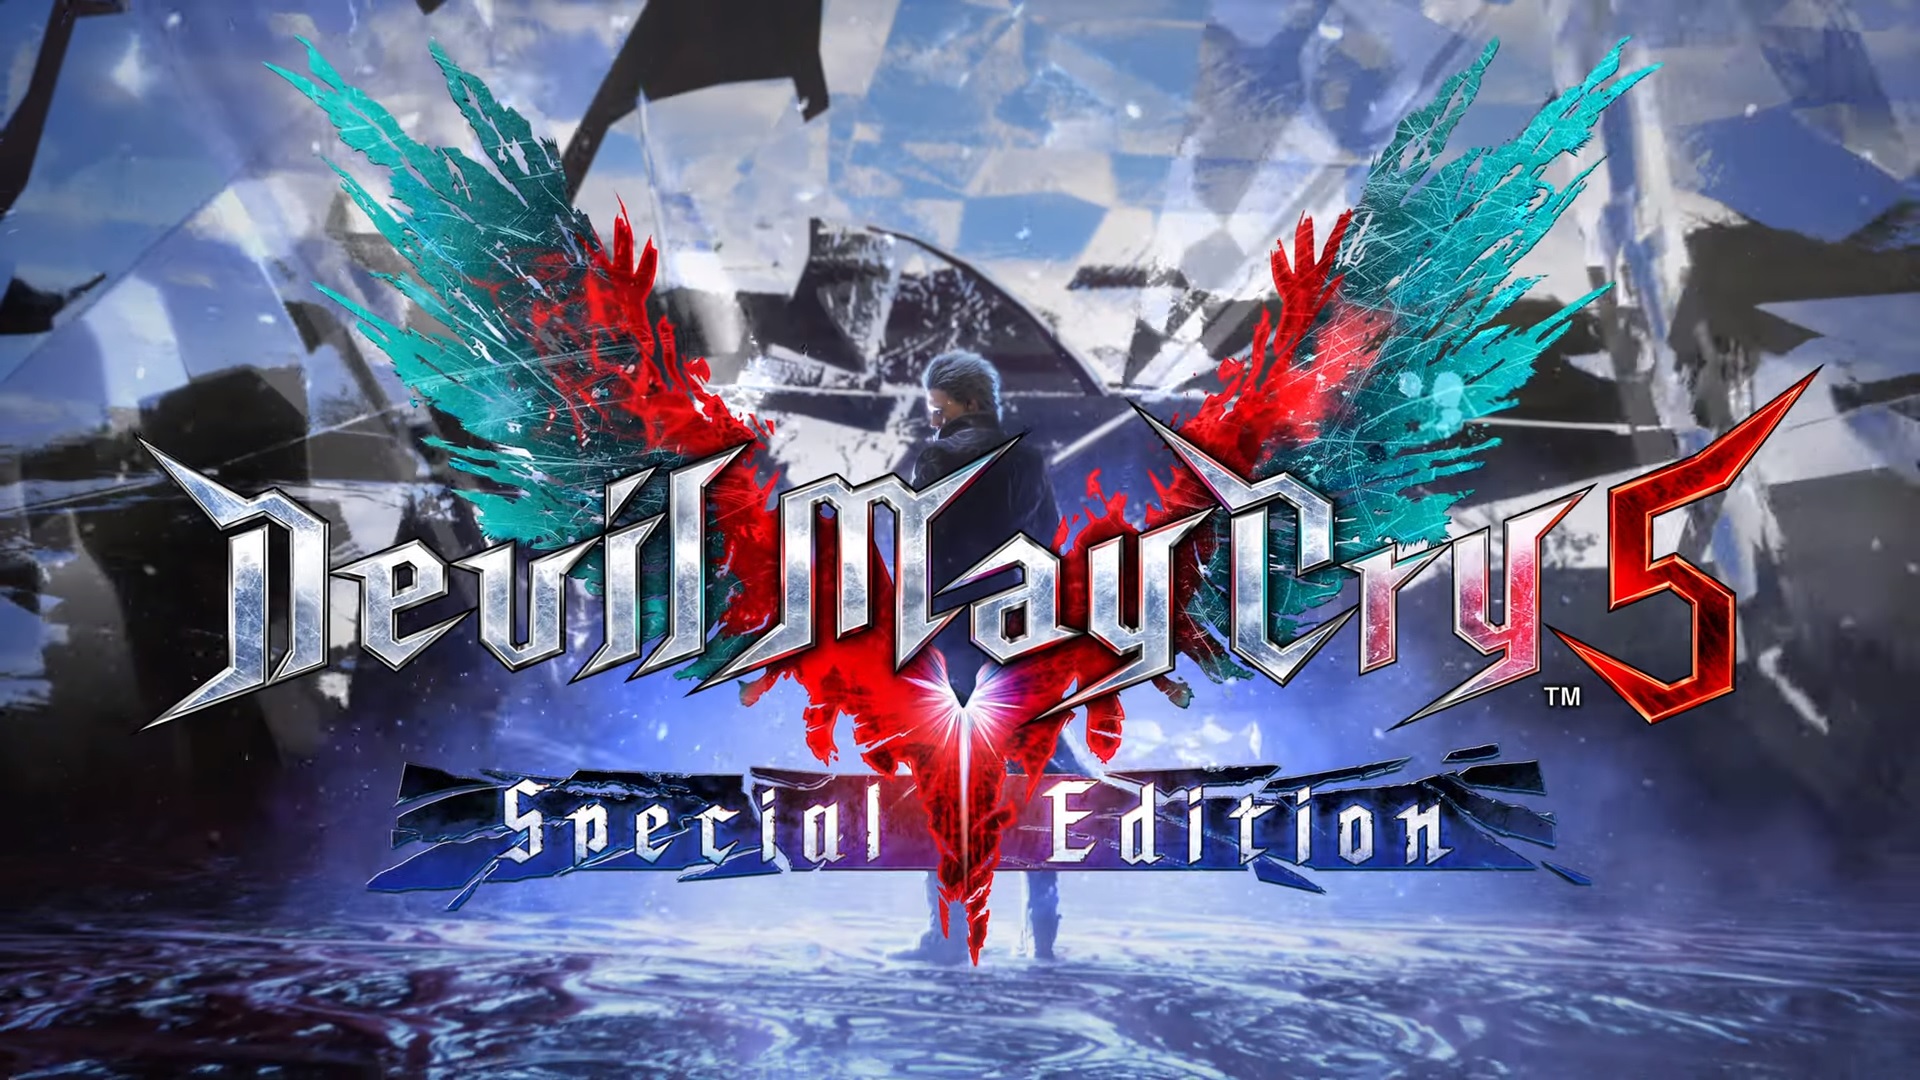 Vergil Cuts Through a New Devil May Cry Gameplay Trailer